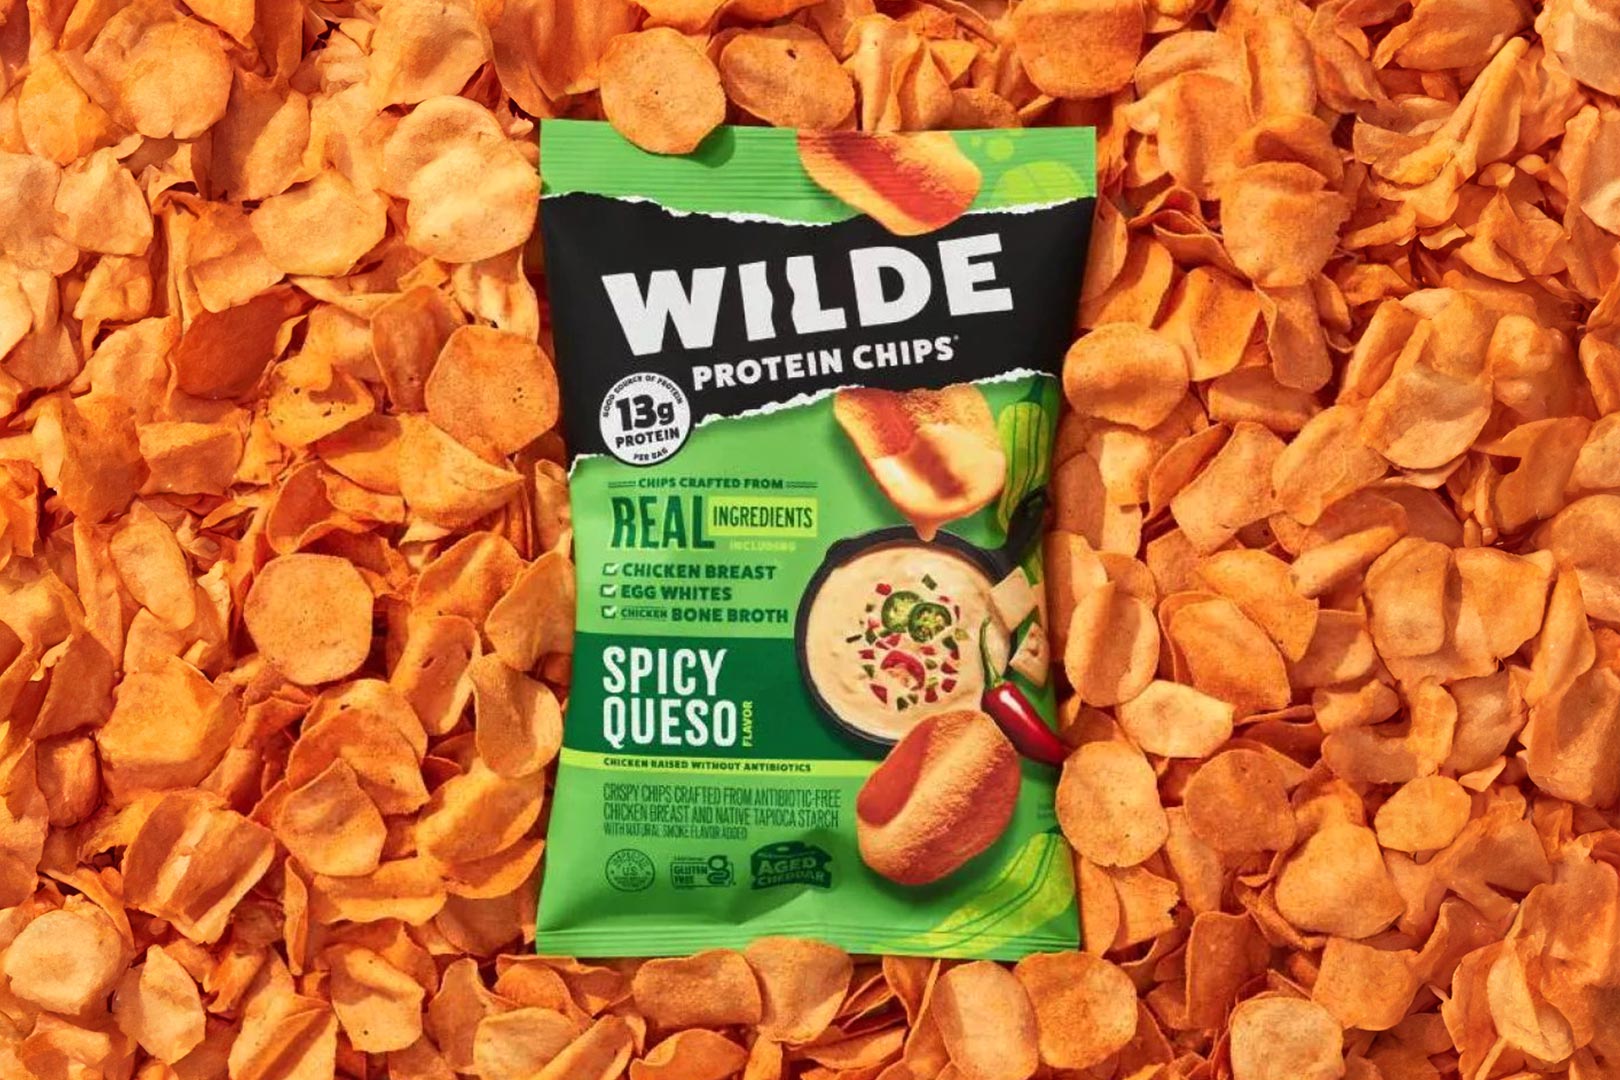 Spicy Queso Wilde Protein Chips